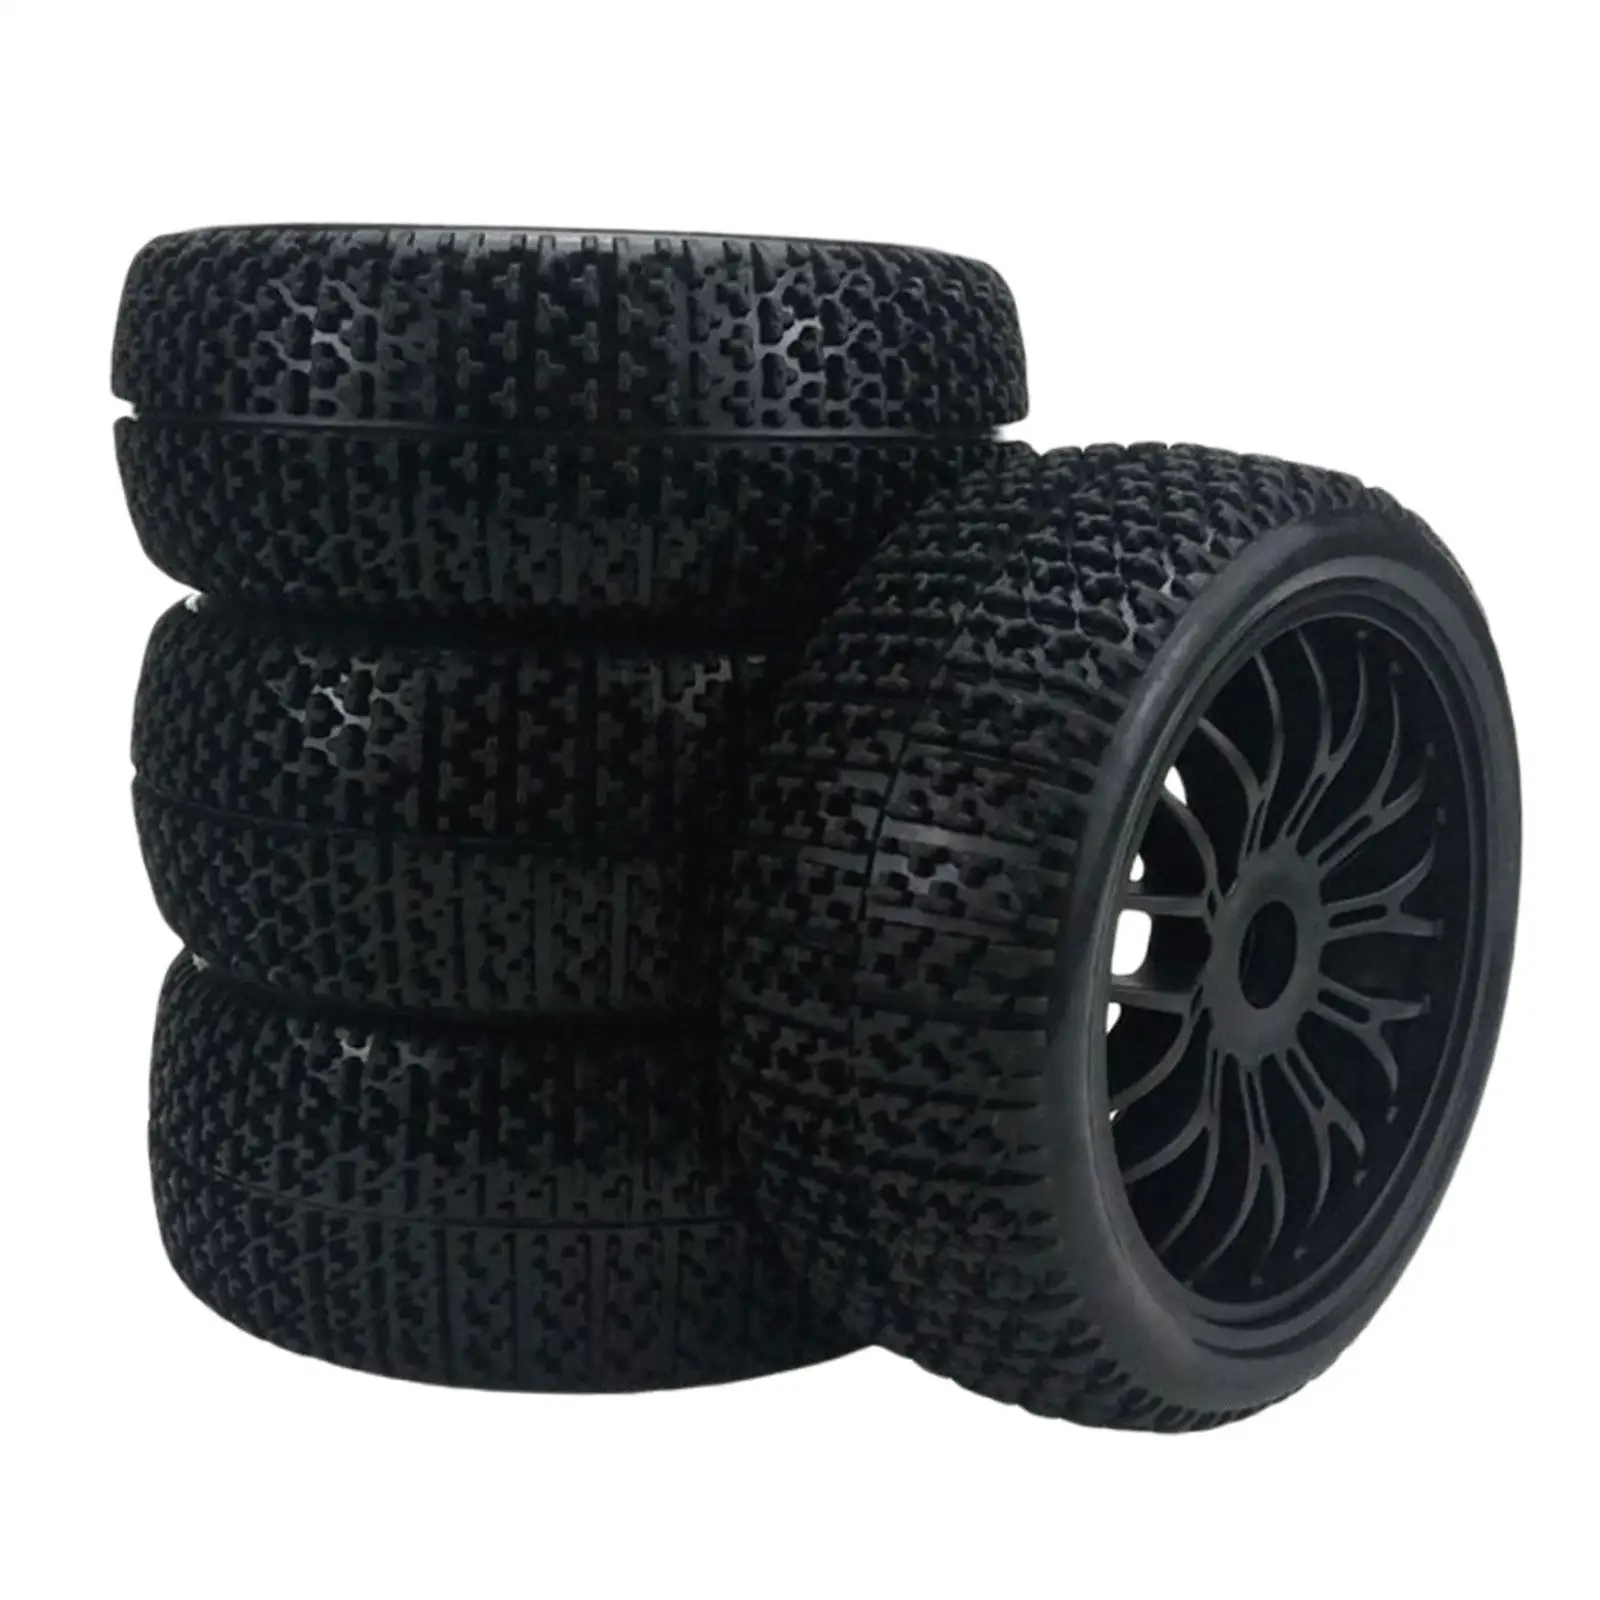 4Pcs RC Wheel Rims 1/7 1:7 17mm Rubber Black RC Car Replacement Model Set Parts for Tamiya RC Car Off Road Crawlers Buggy